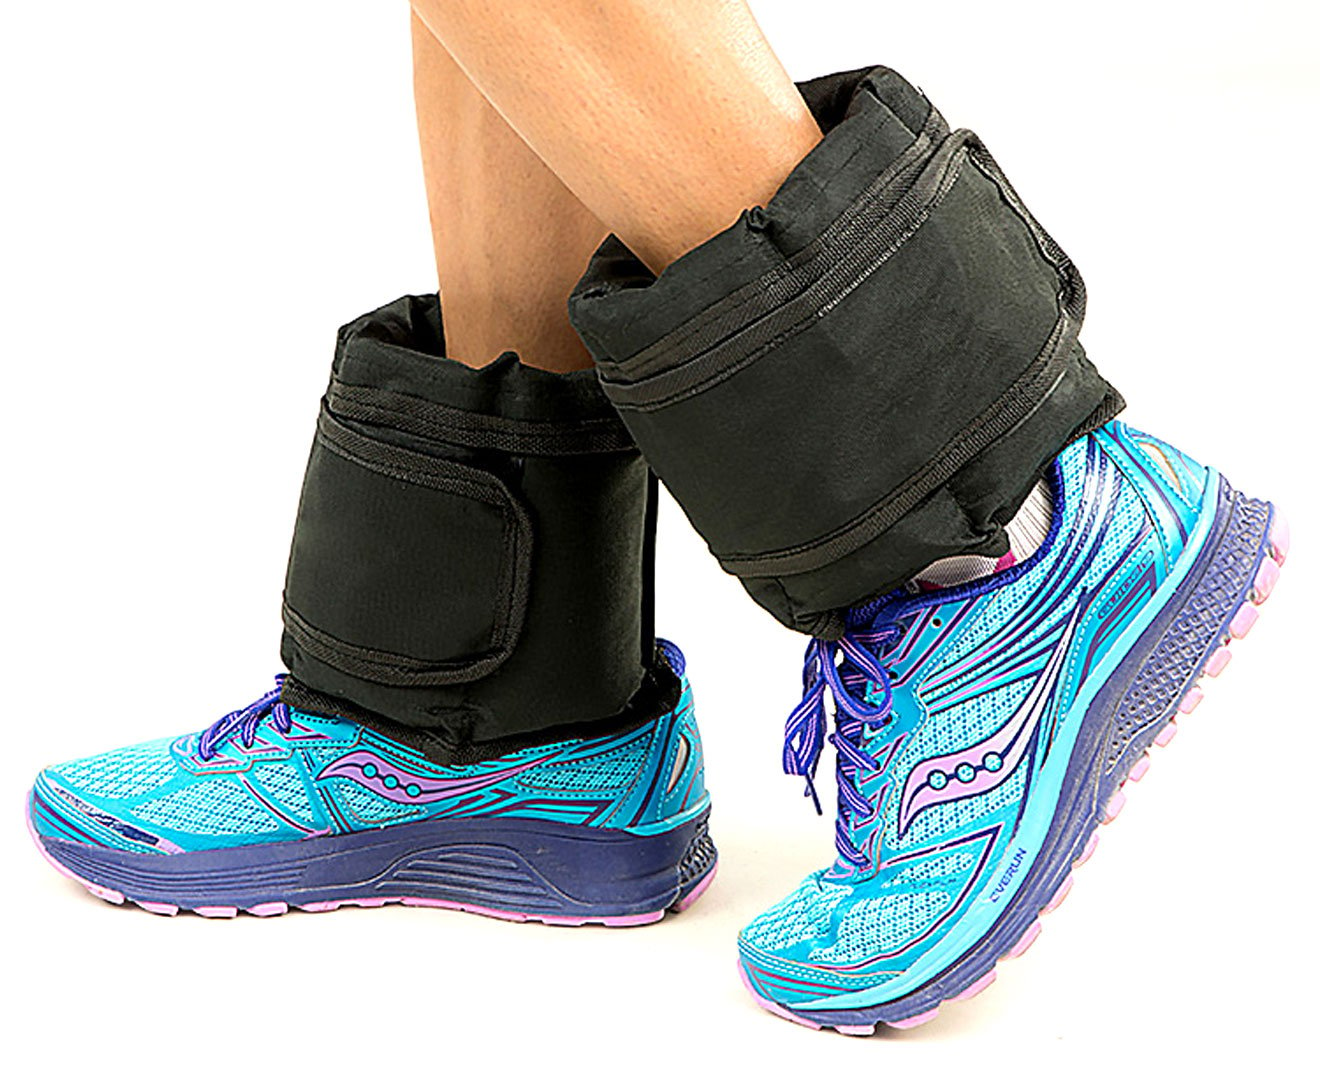 2x 2.5kg Adjustable Ankle Exercise Running Weights 1